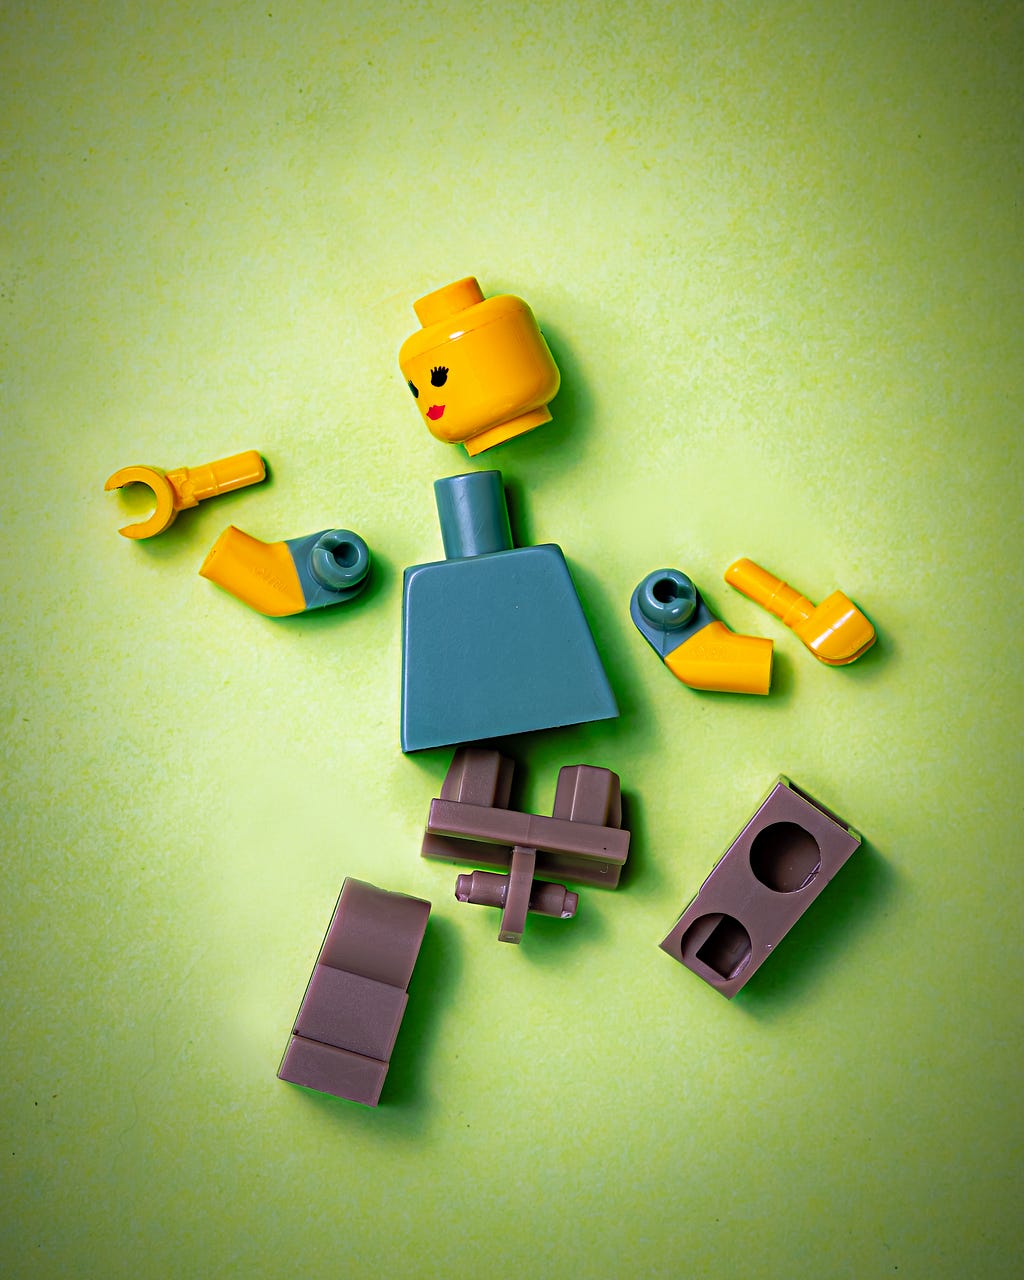 A lego figurine completely disassembled